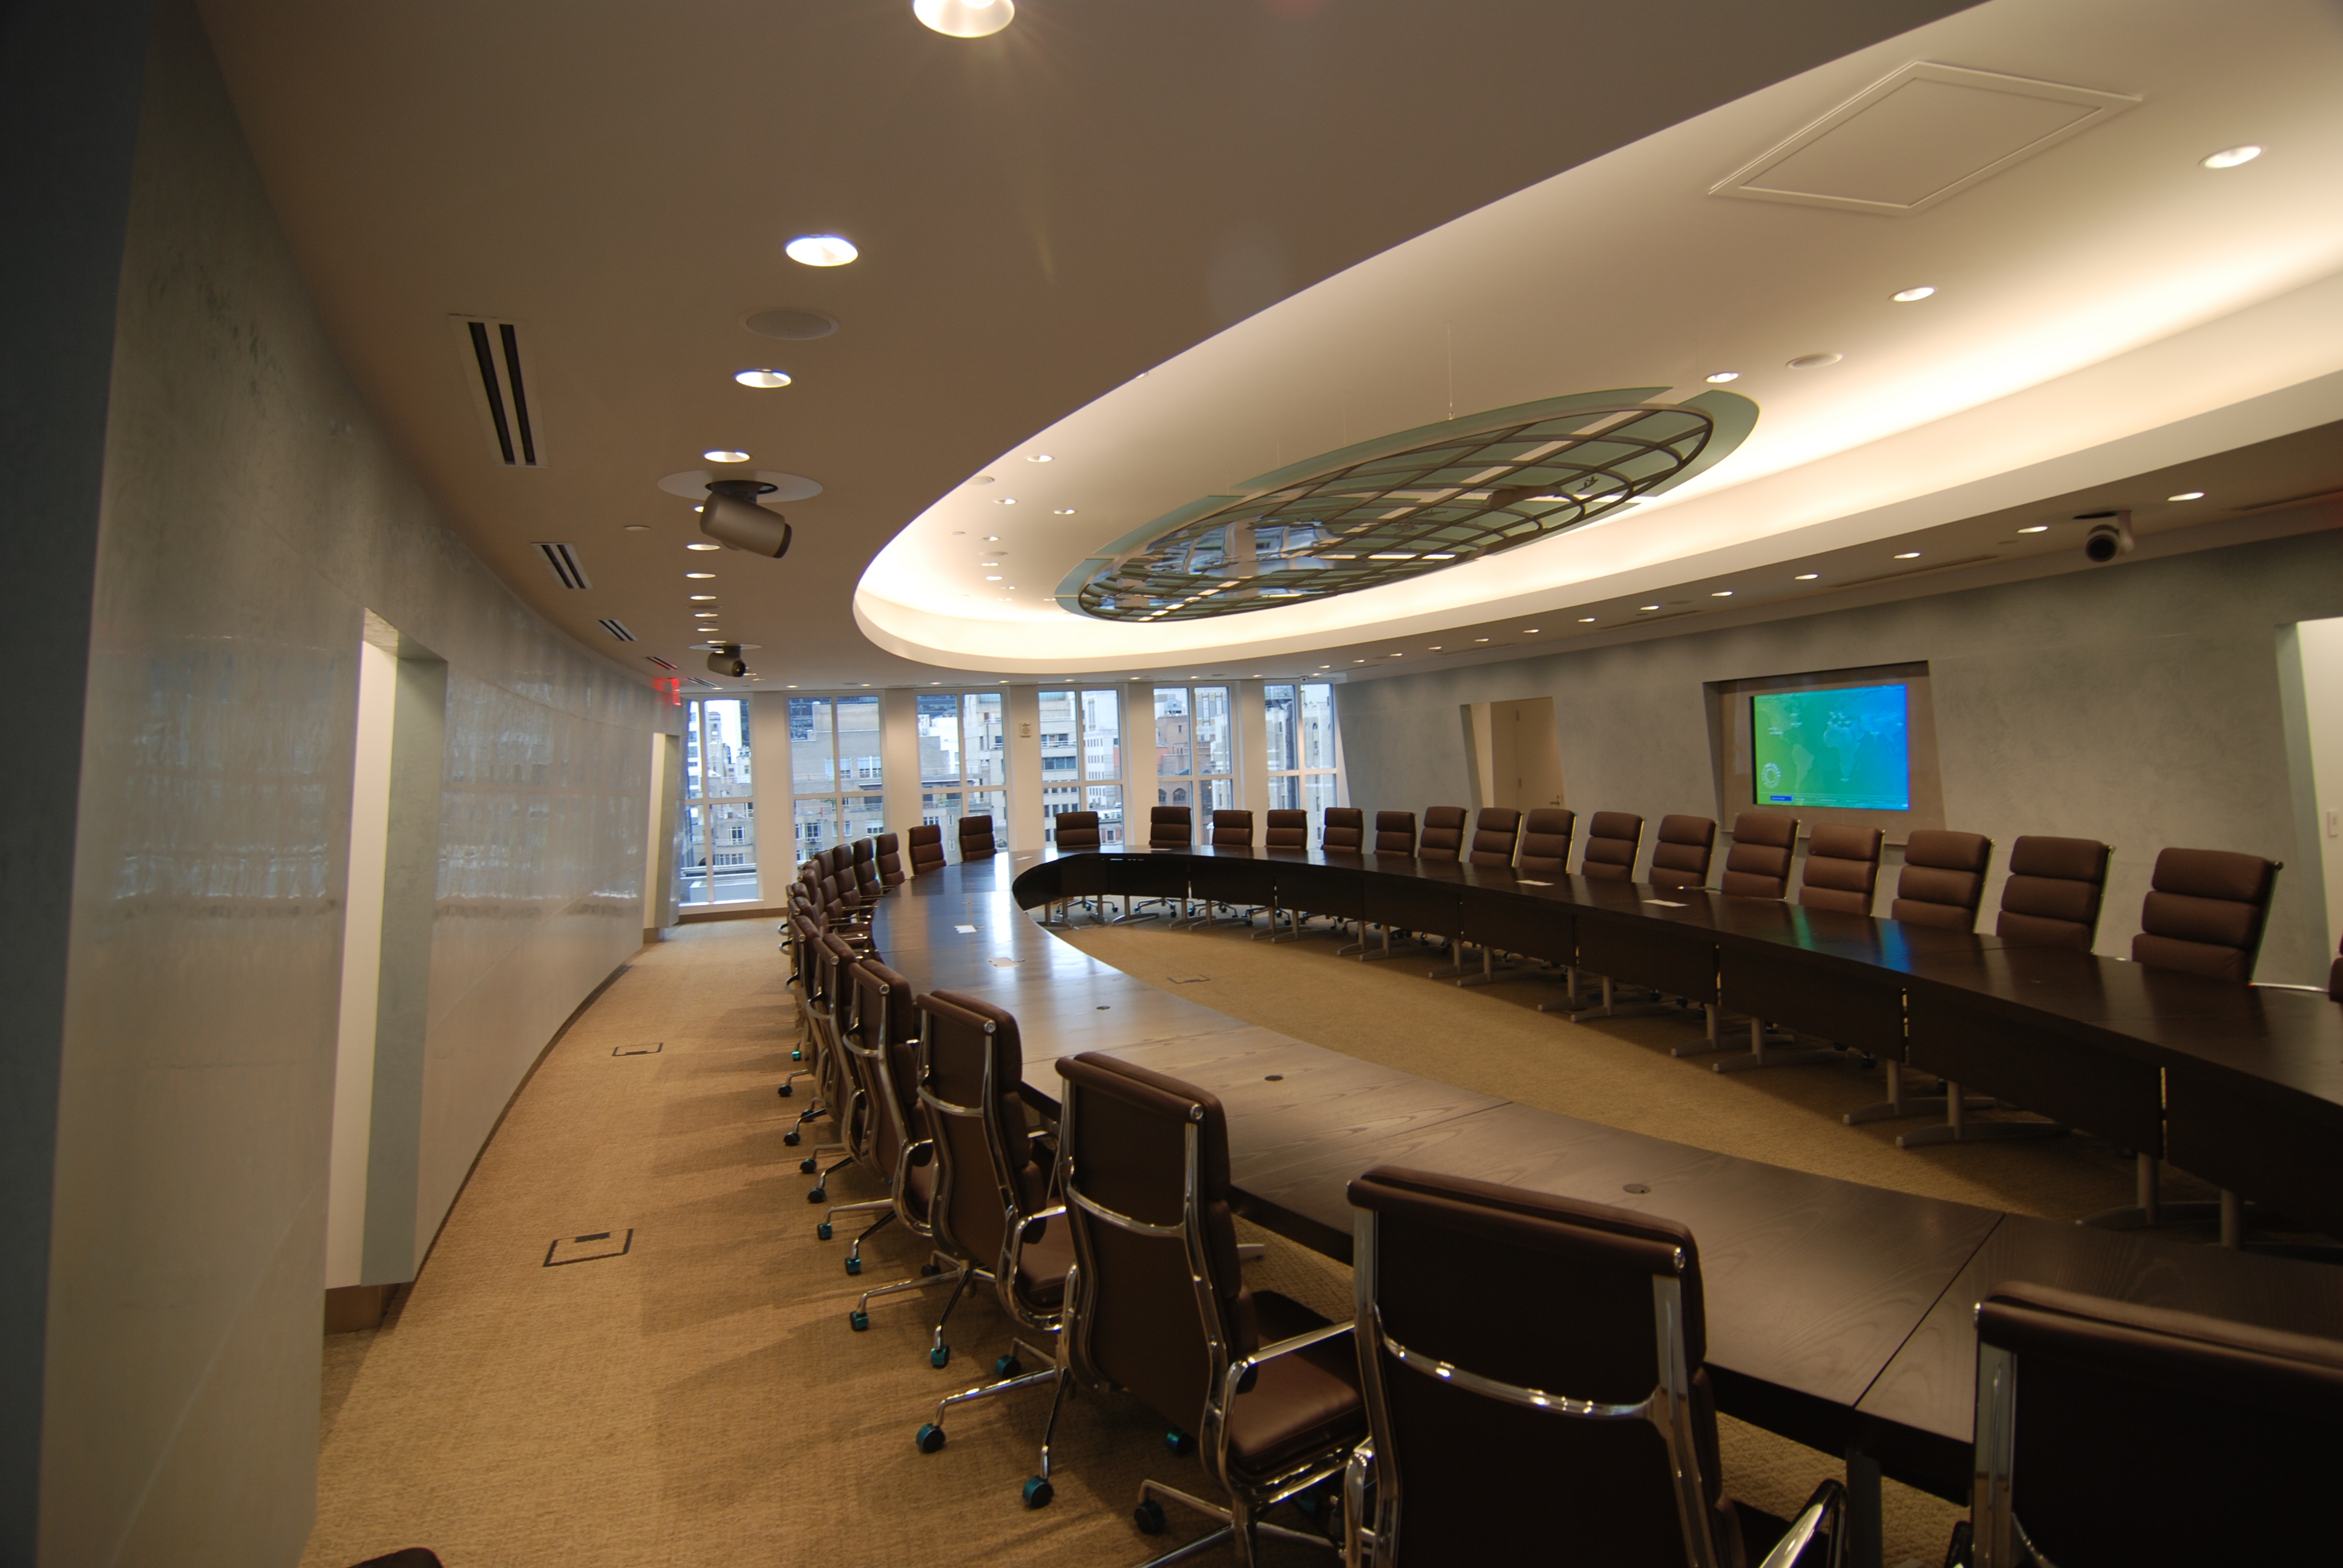 What Are Some Conference Room Design Tips?